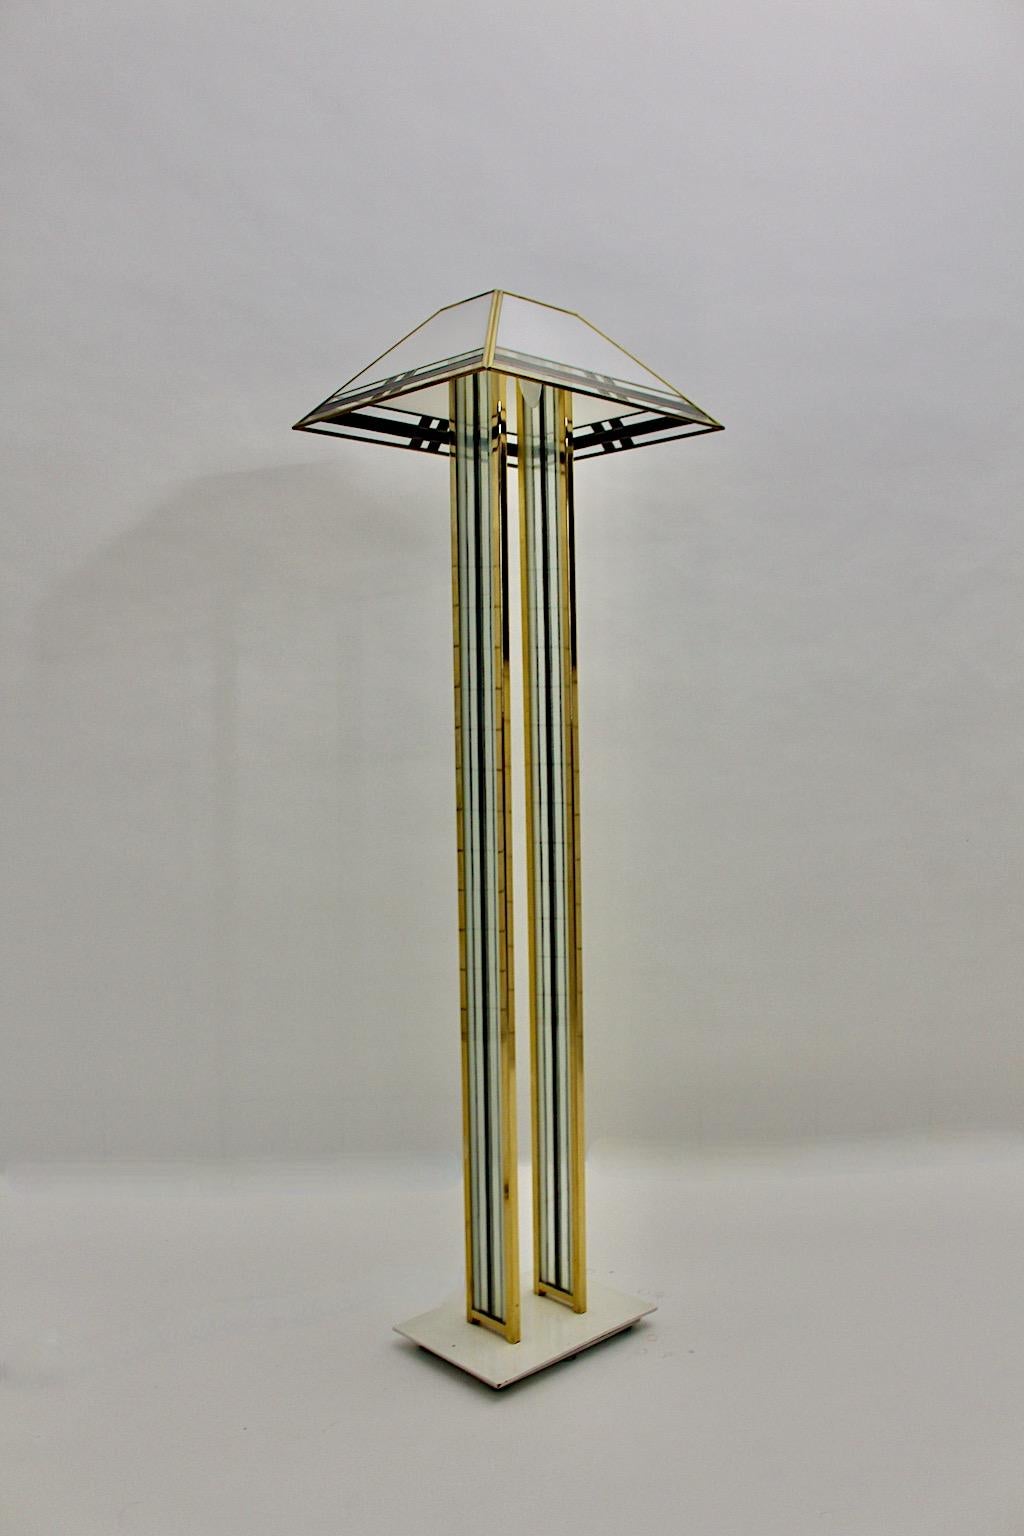 Modern Metal Lucite Vintage Floor Lamp Albano Poli for Poliarte, 1970s, Italy For Sale 6